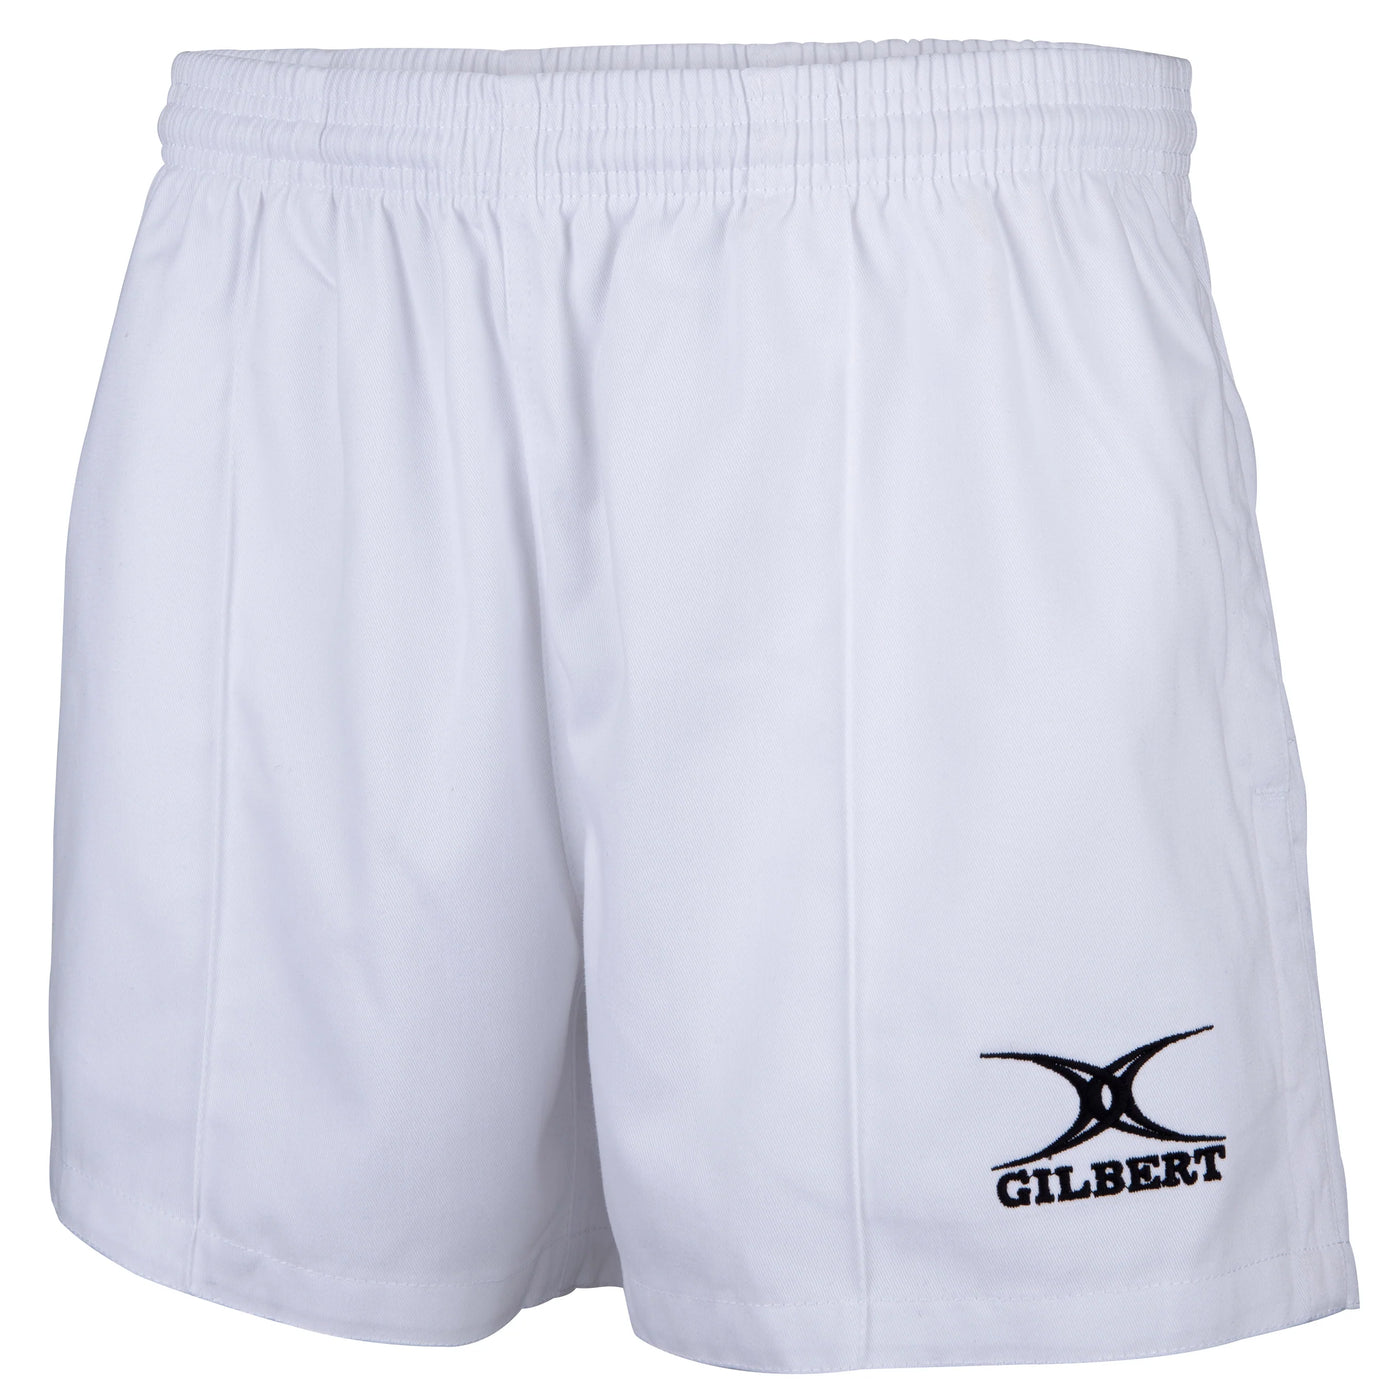 Kiwi Pro Rugby Short White Junior (with pockets)